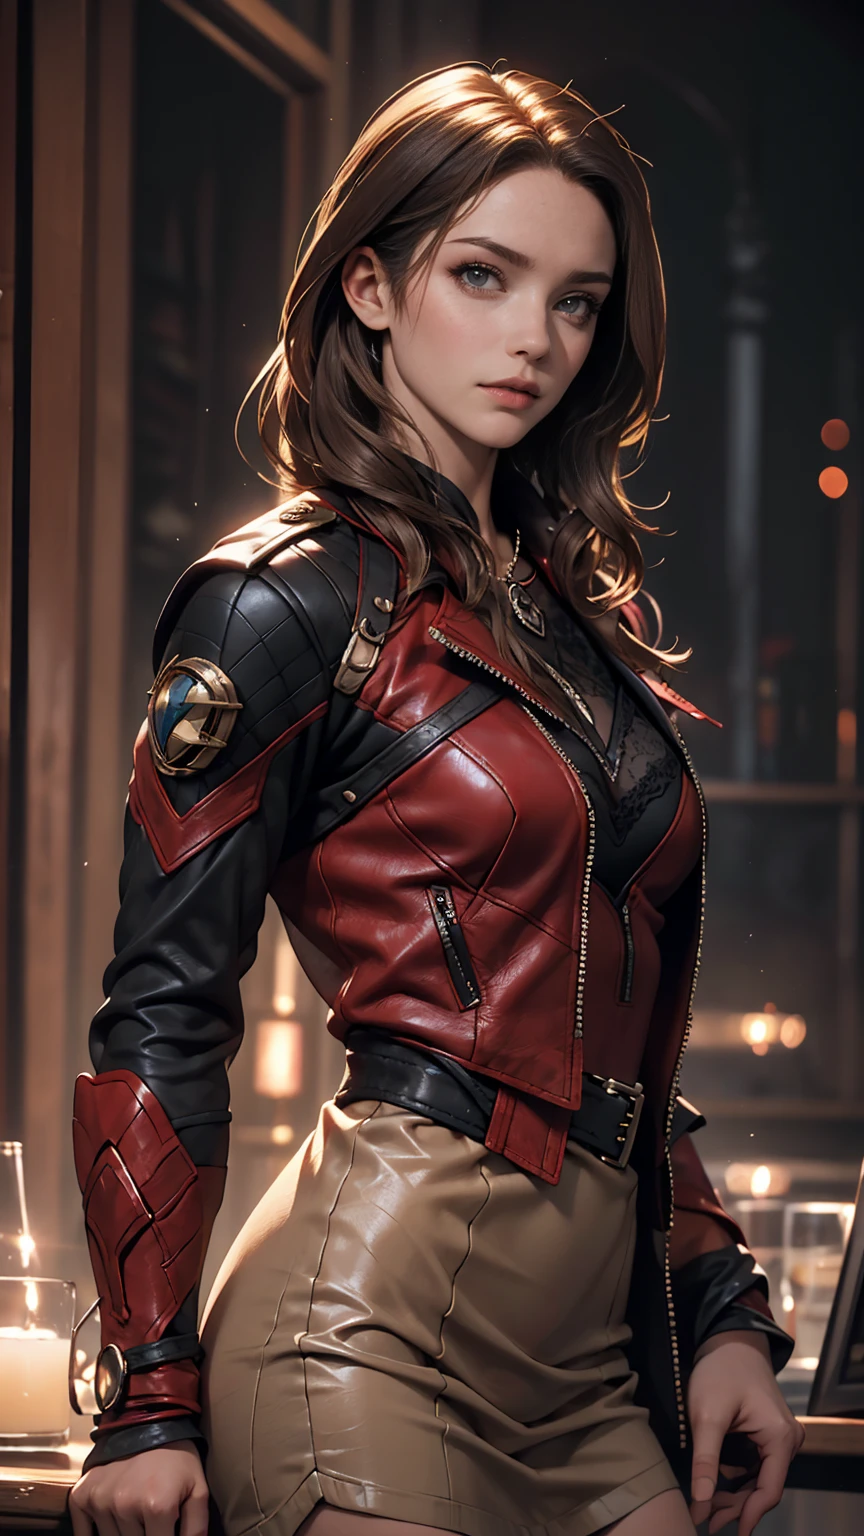 Highly detailed female photos, Lola Elizabeth, Scarlet Witch, the avengers, wearing a black lace dress, Open red leather jacket, 8K Ultra HD, Raw photo, Model photoshoot